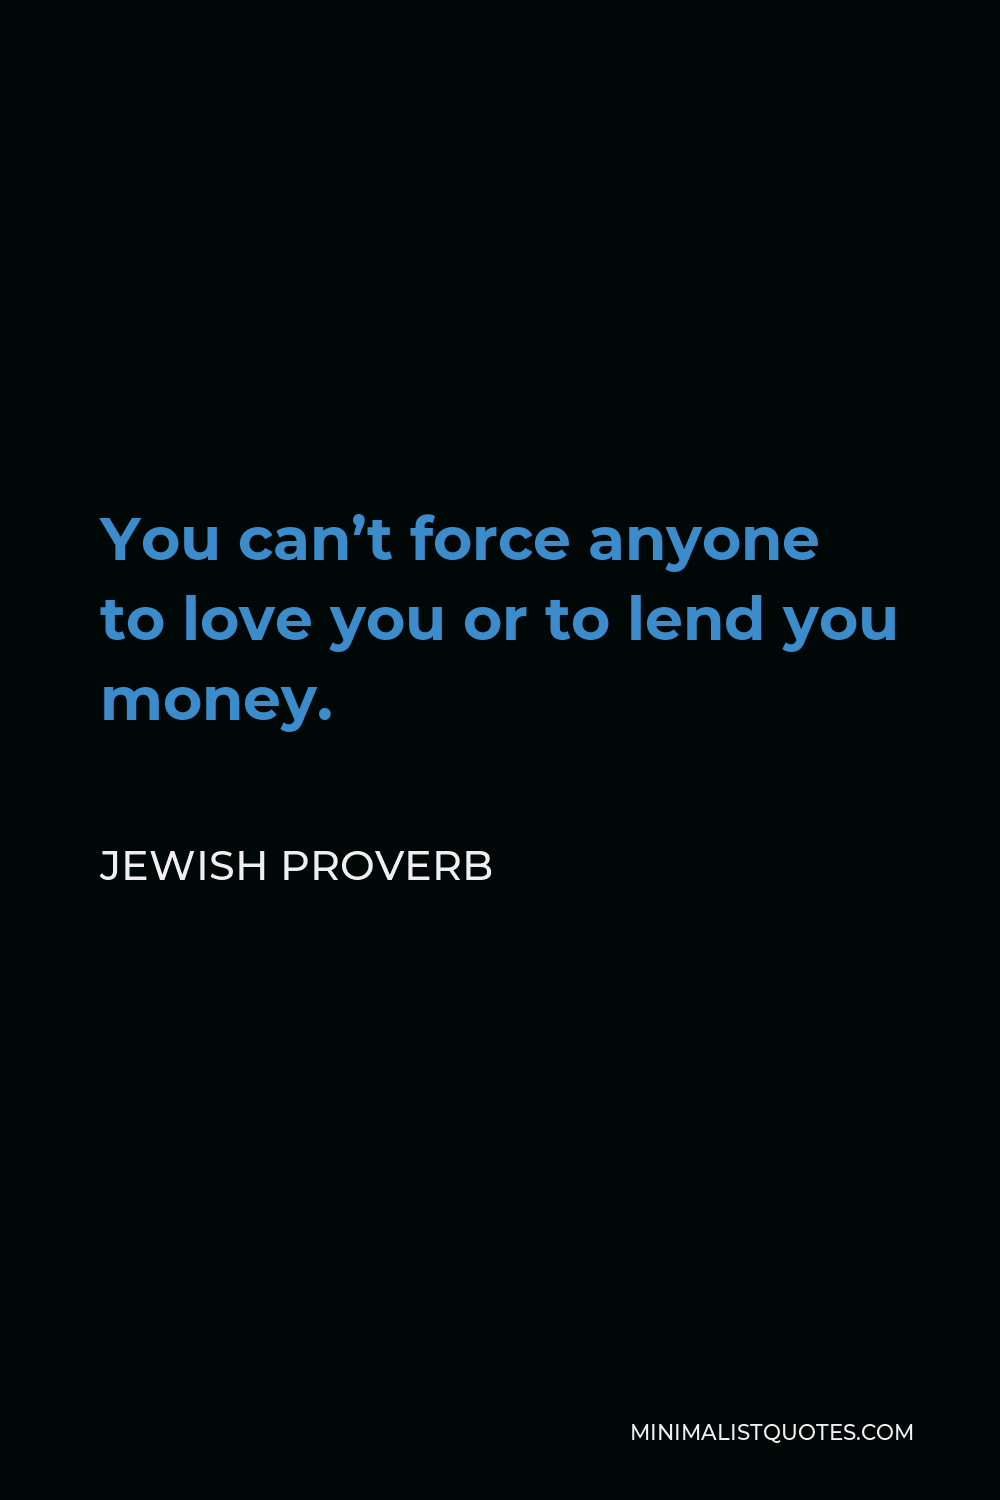 Jewish Proverb Quote - You can’t force anyone to love you or to lend you money.